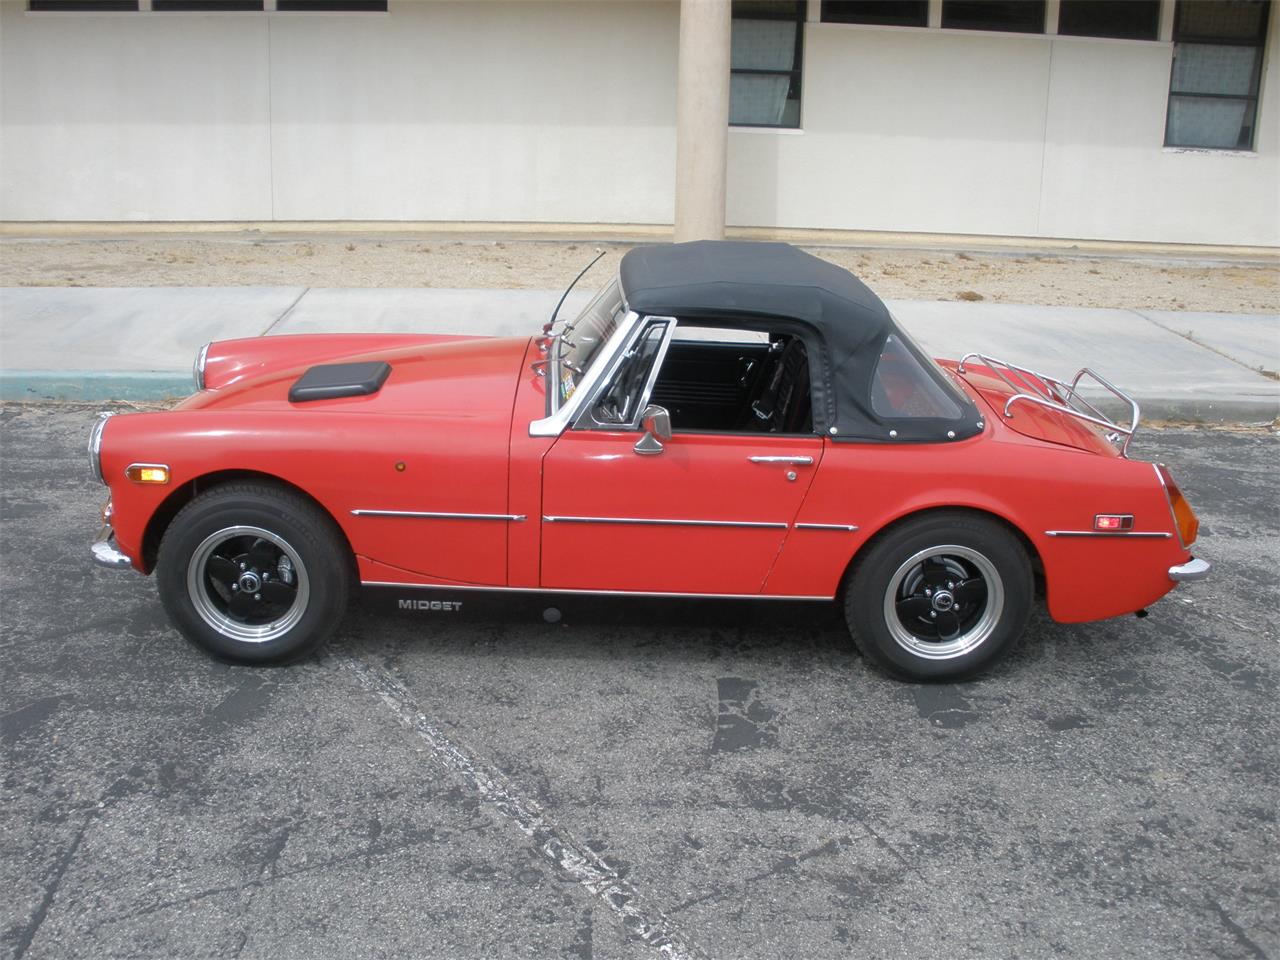 1974 MG Midget for sale in 29 Palms, CA – photo 2